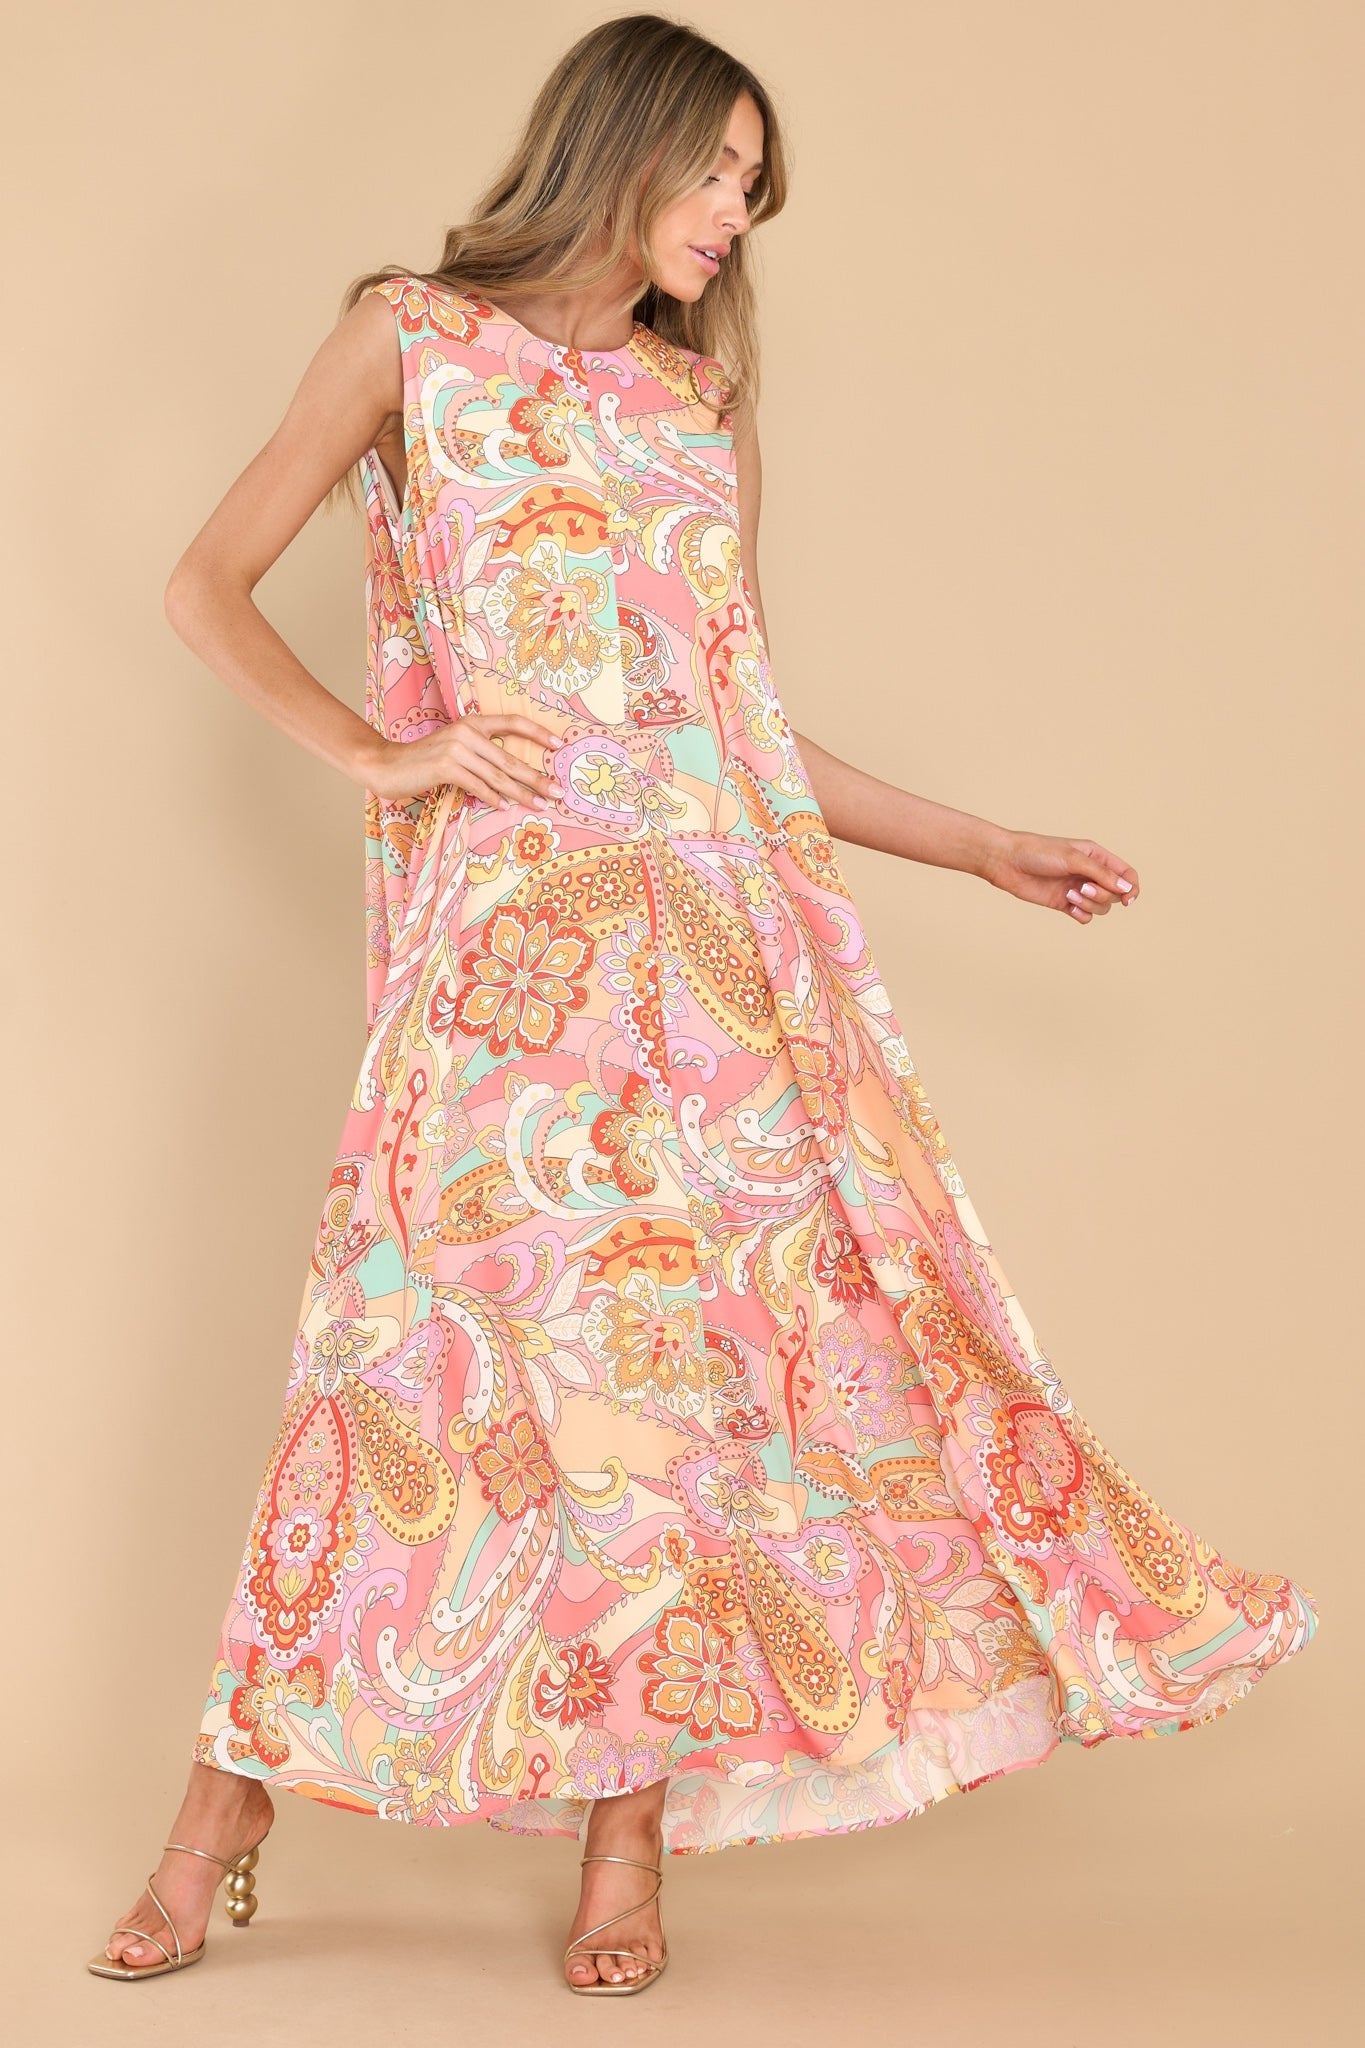 This multi-colored dress features a high round neckline, a sleeveless design, a keyhole cutout at the back of the neck with a button closure, and a loose, flowy silhouette.